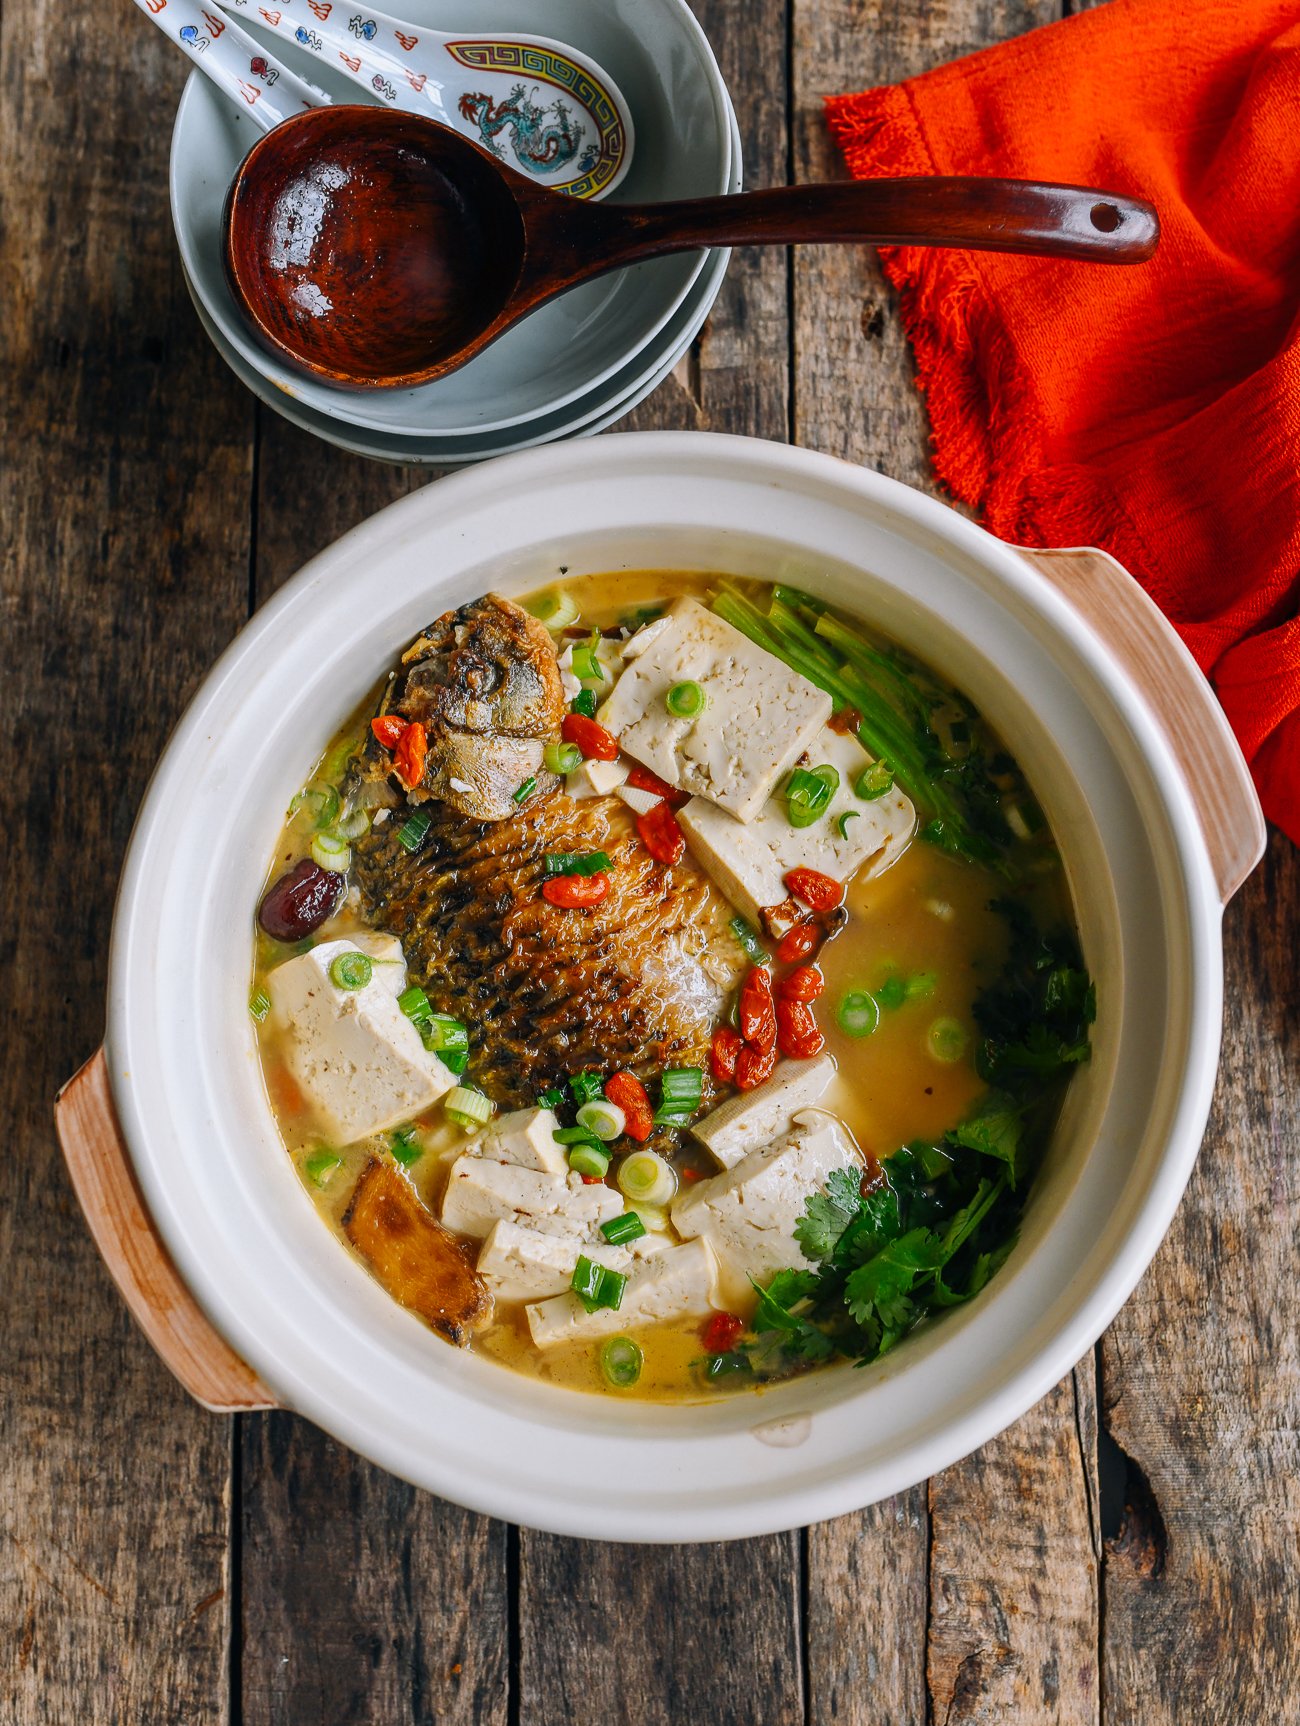 Chinese Milky Fish Soup with Tofu, Red Dates, and Goji Berries